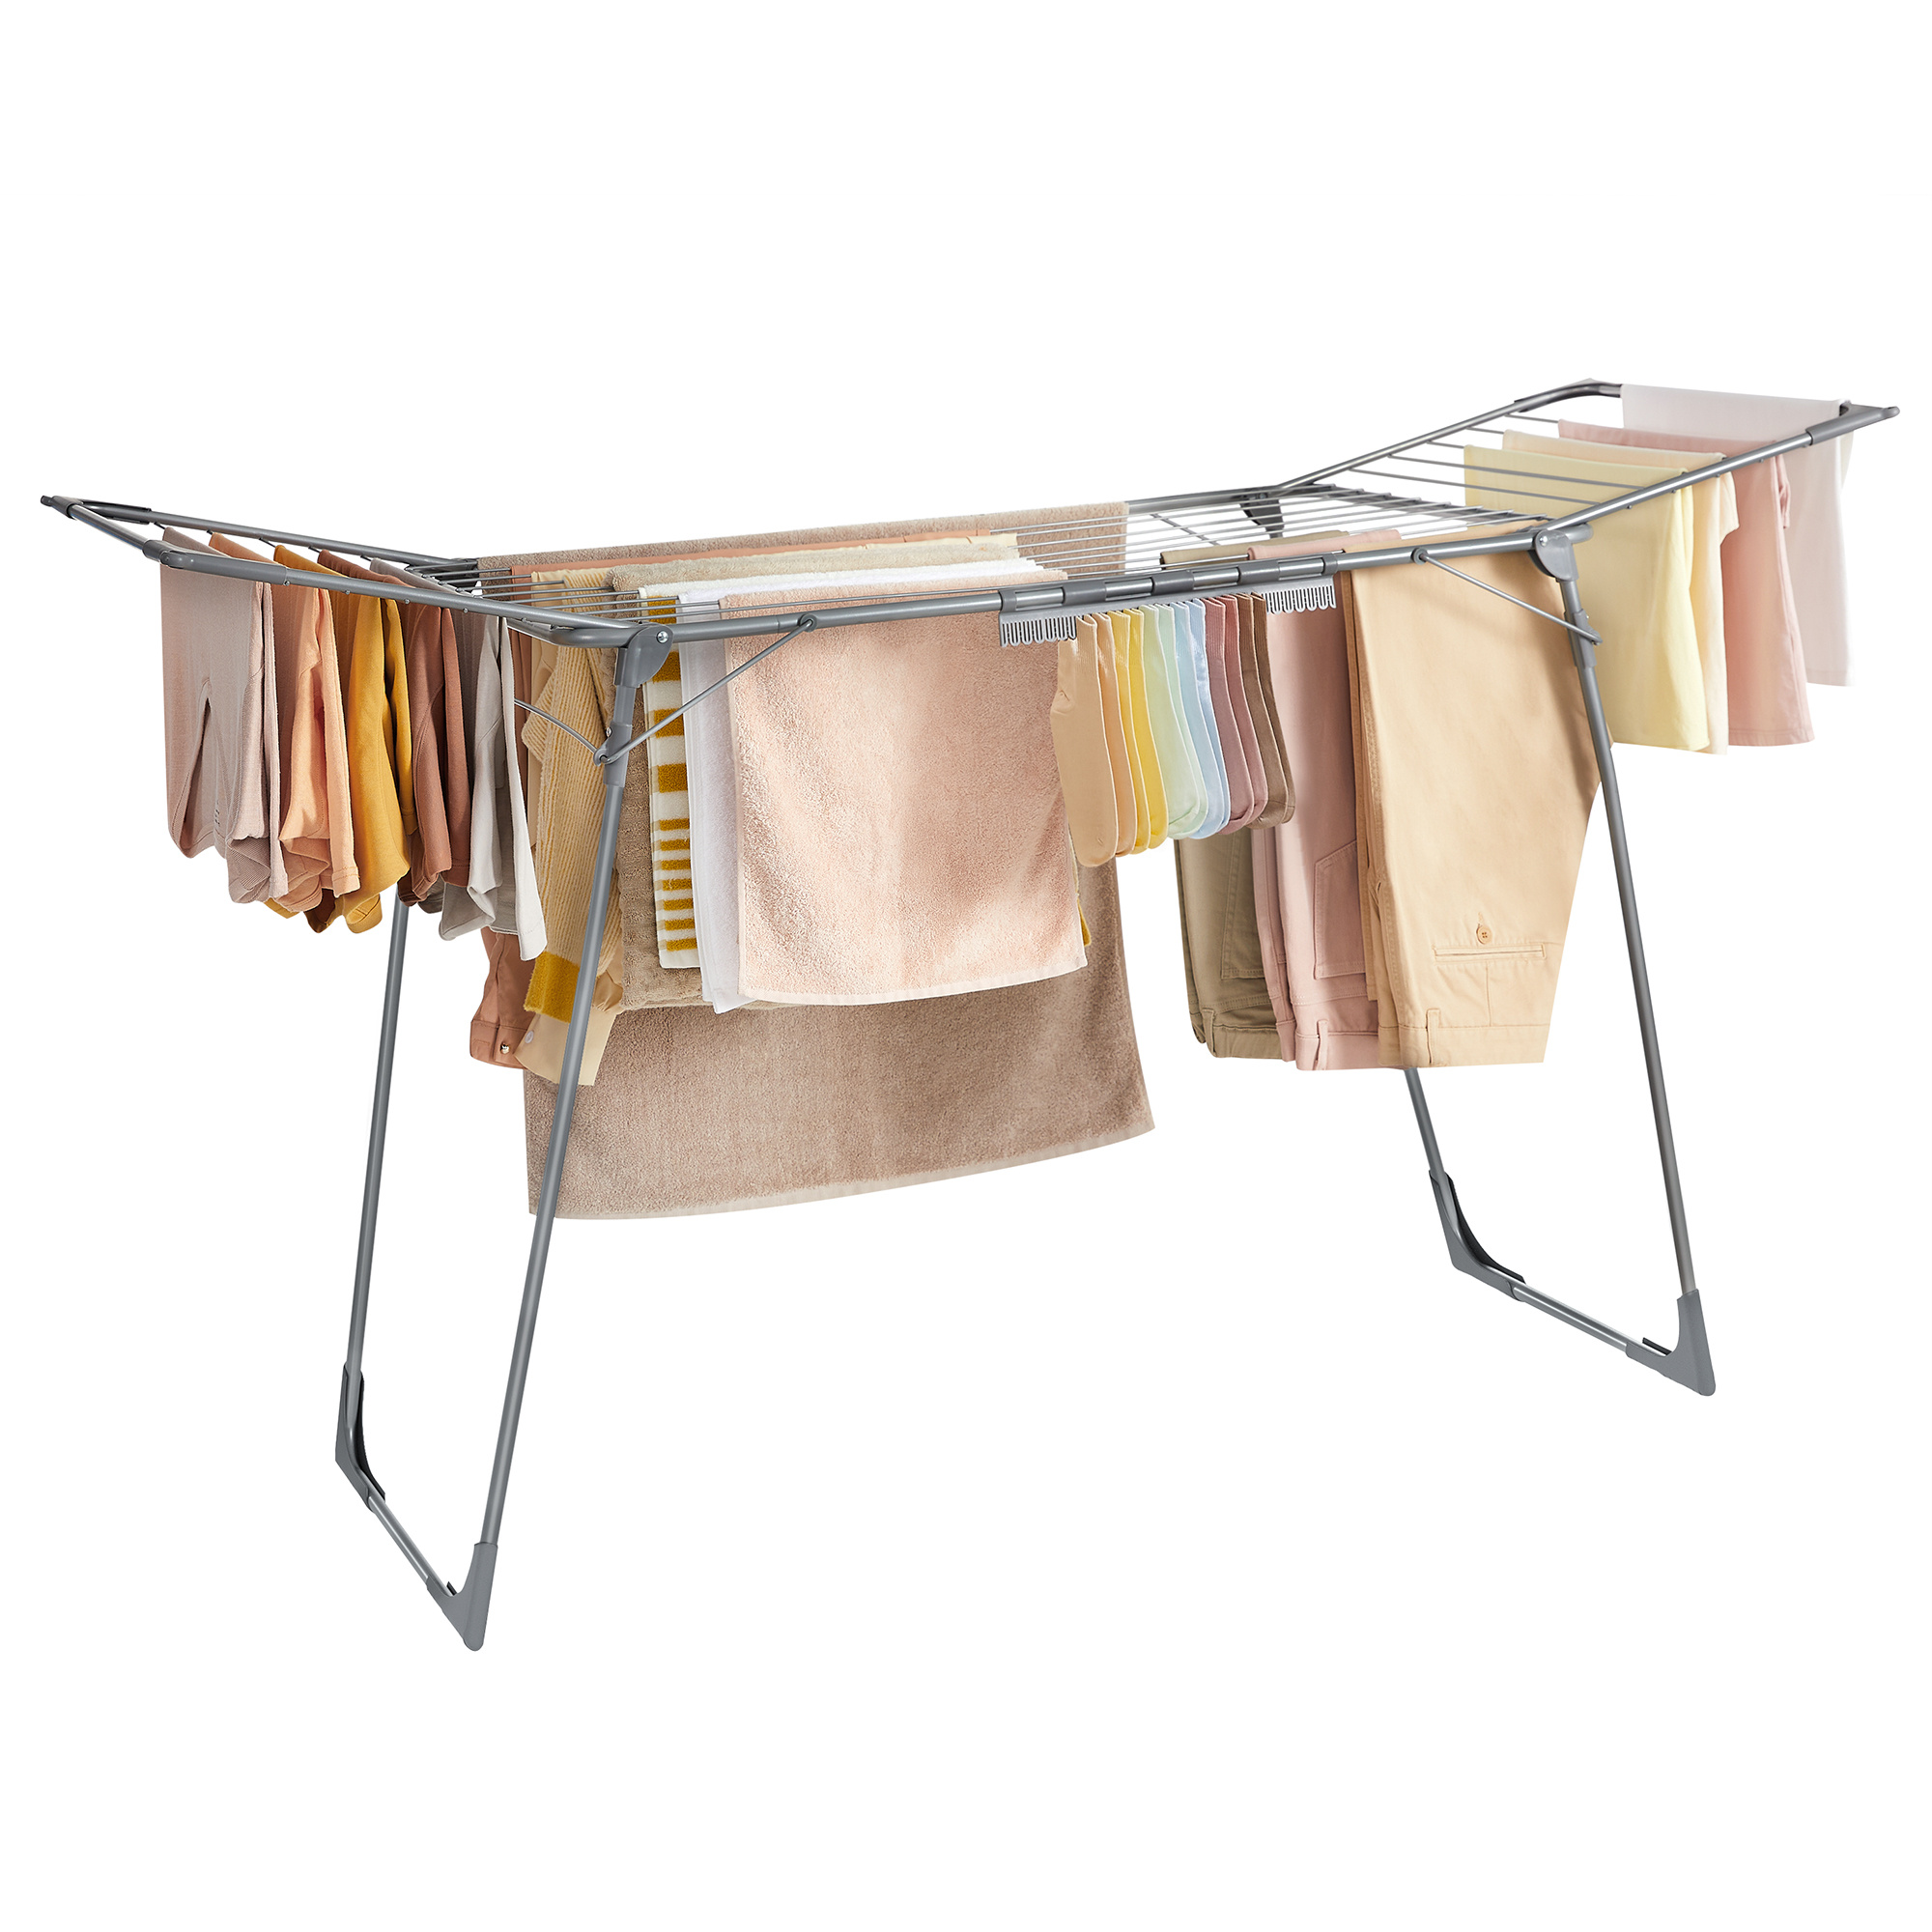 

Songmics Clothes Drying Rack Foldable, Laundry Drying Rack, Space-saving, 22.2 X 68.1 X 38 Inches, Sock Clips, Metal Structure, For Clothes, Towels, Linens, Indoor, Outdoor